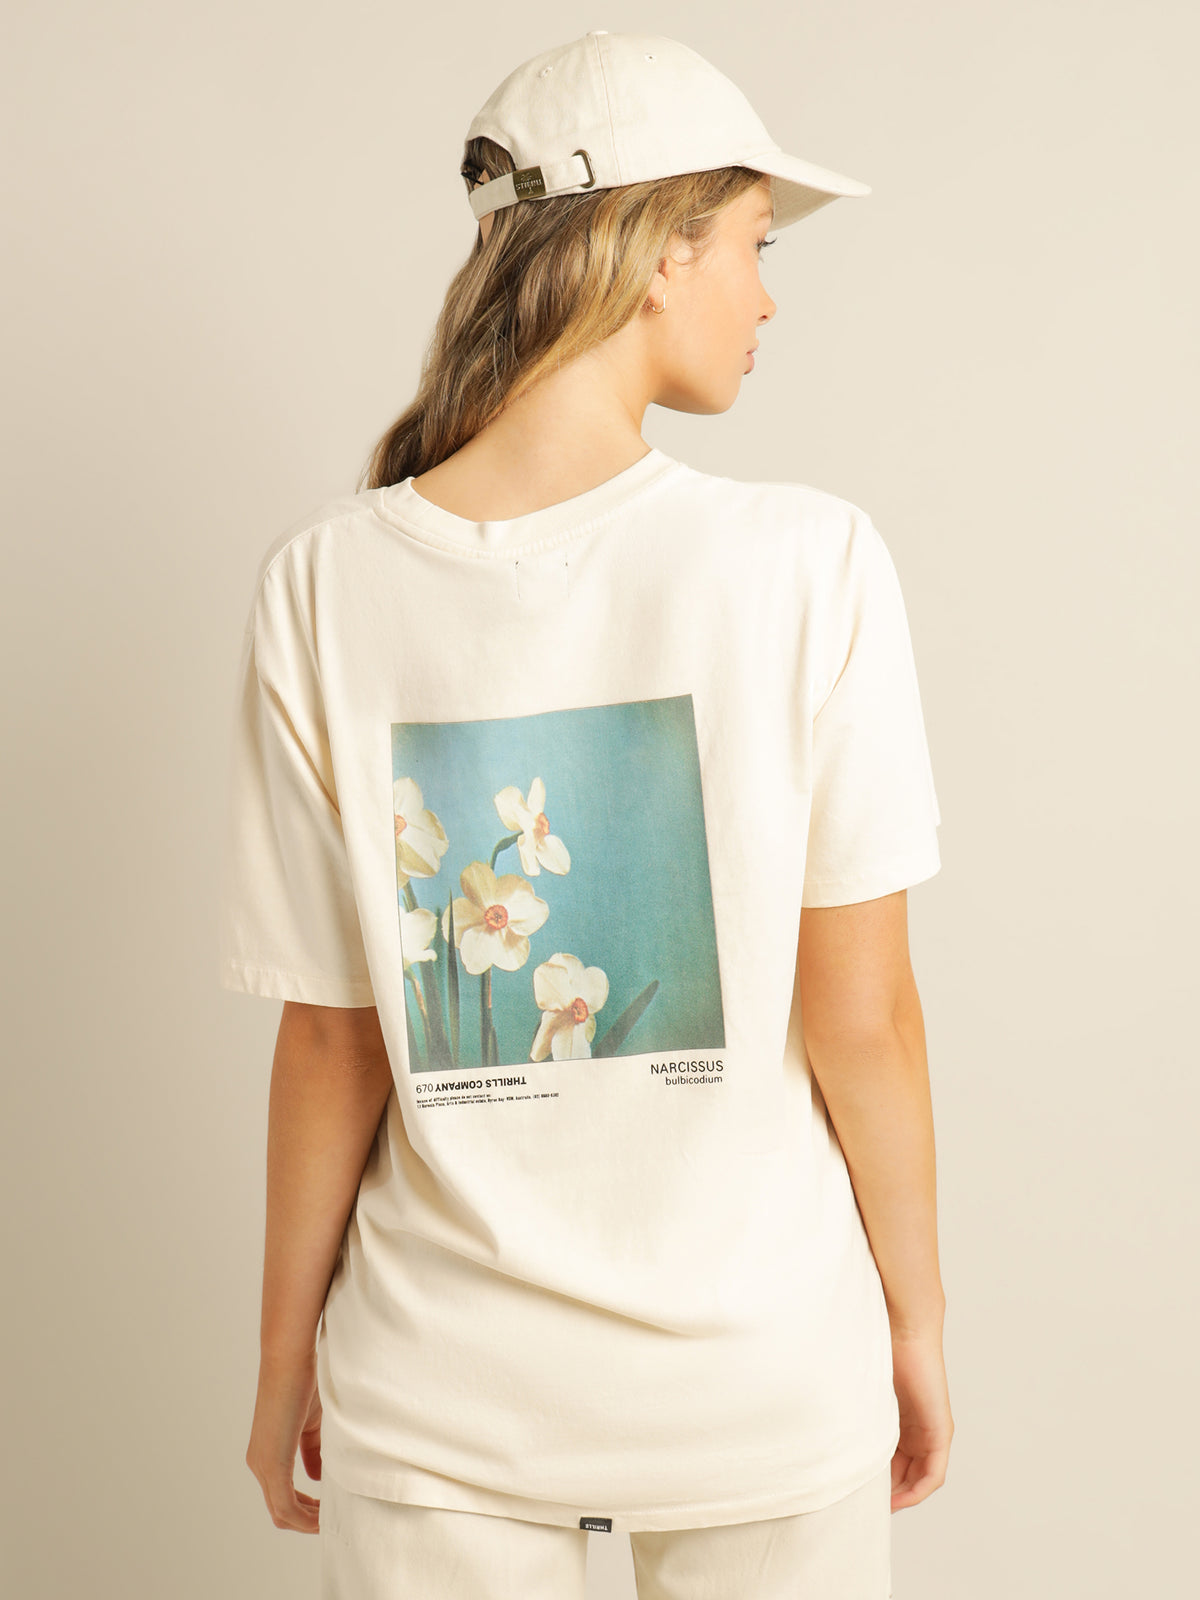 Narcissus Merch Fit T-Shirt in Heritage White